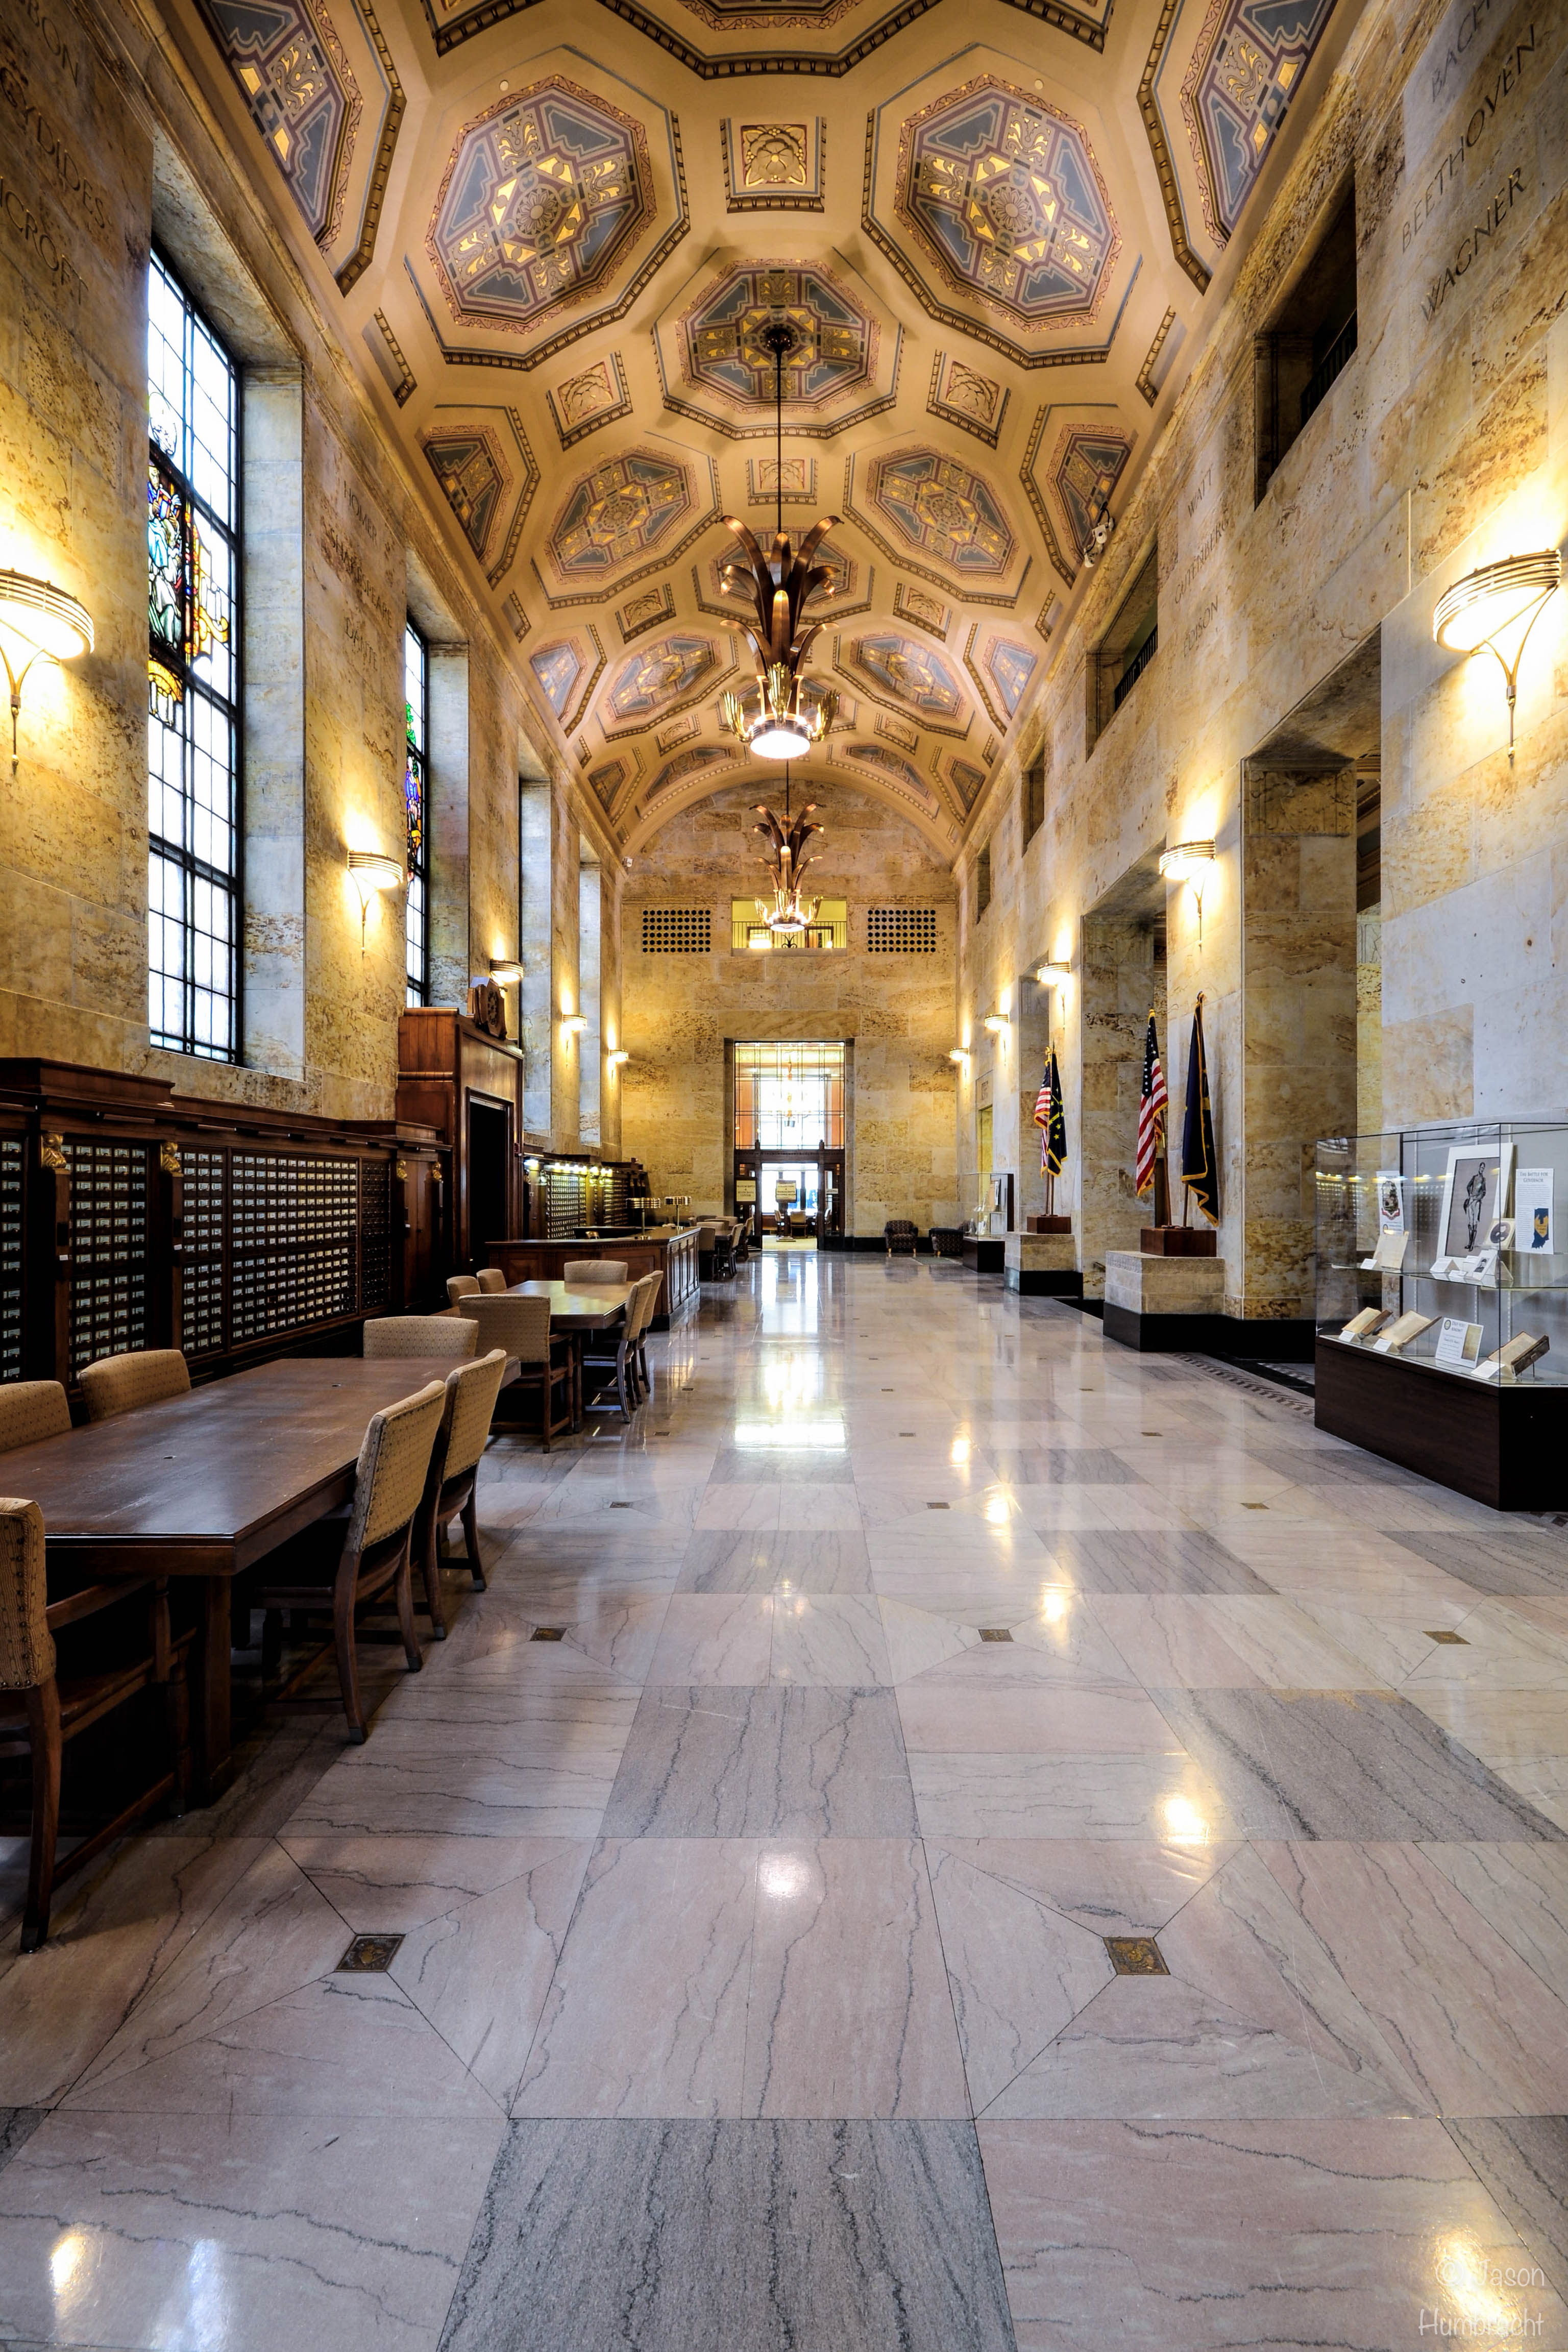 Indiana State Library | The Great Hall | Indiana Architecture | Interior Architecture | Indianapolis, Indiana | Image By Indiana Architectural Photographer Jason Humbracht